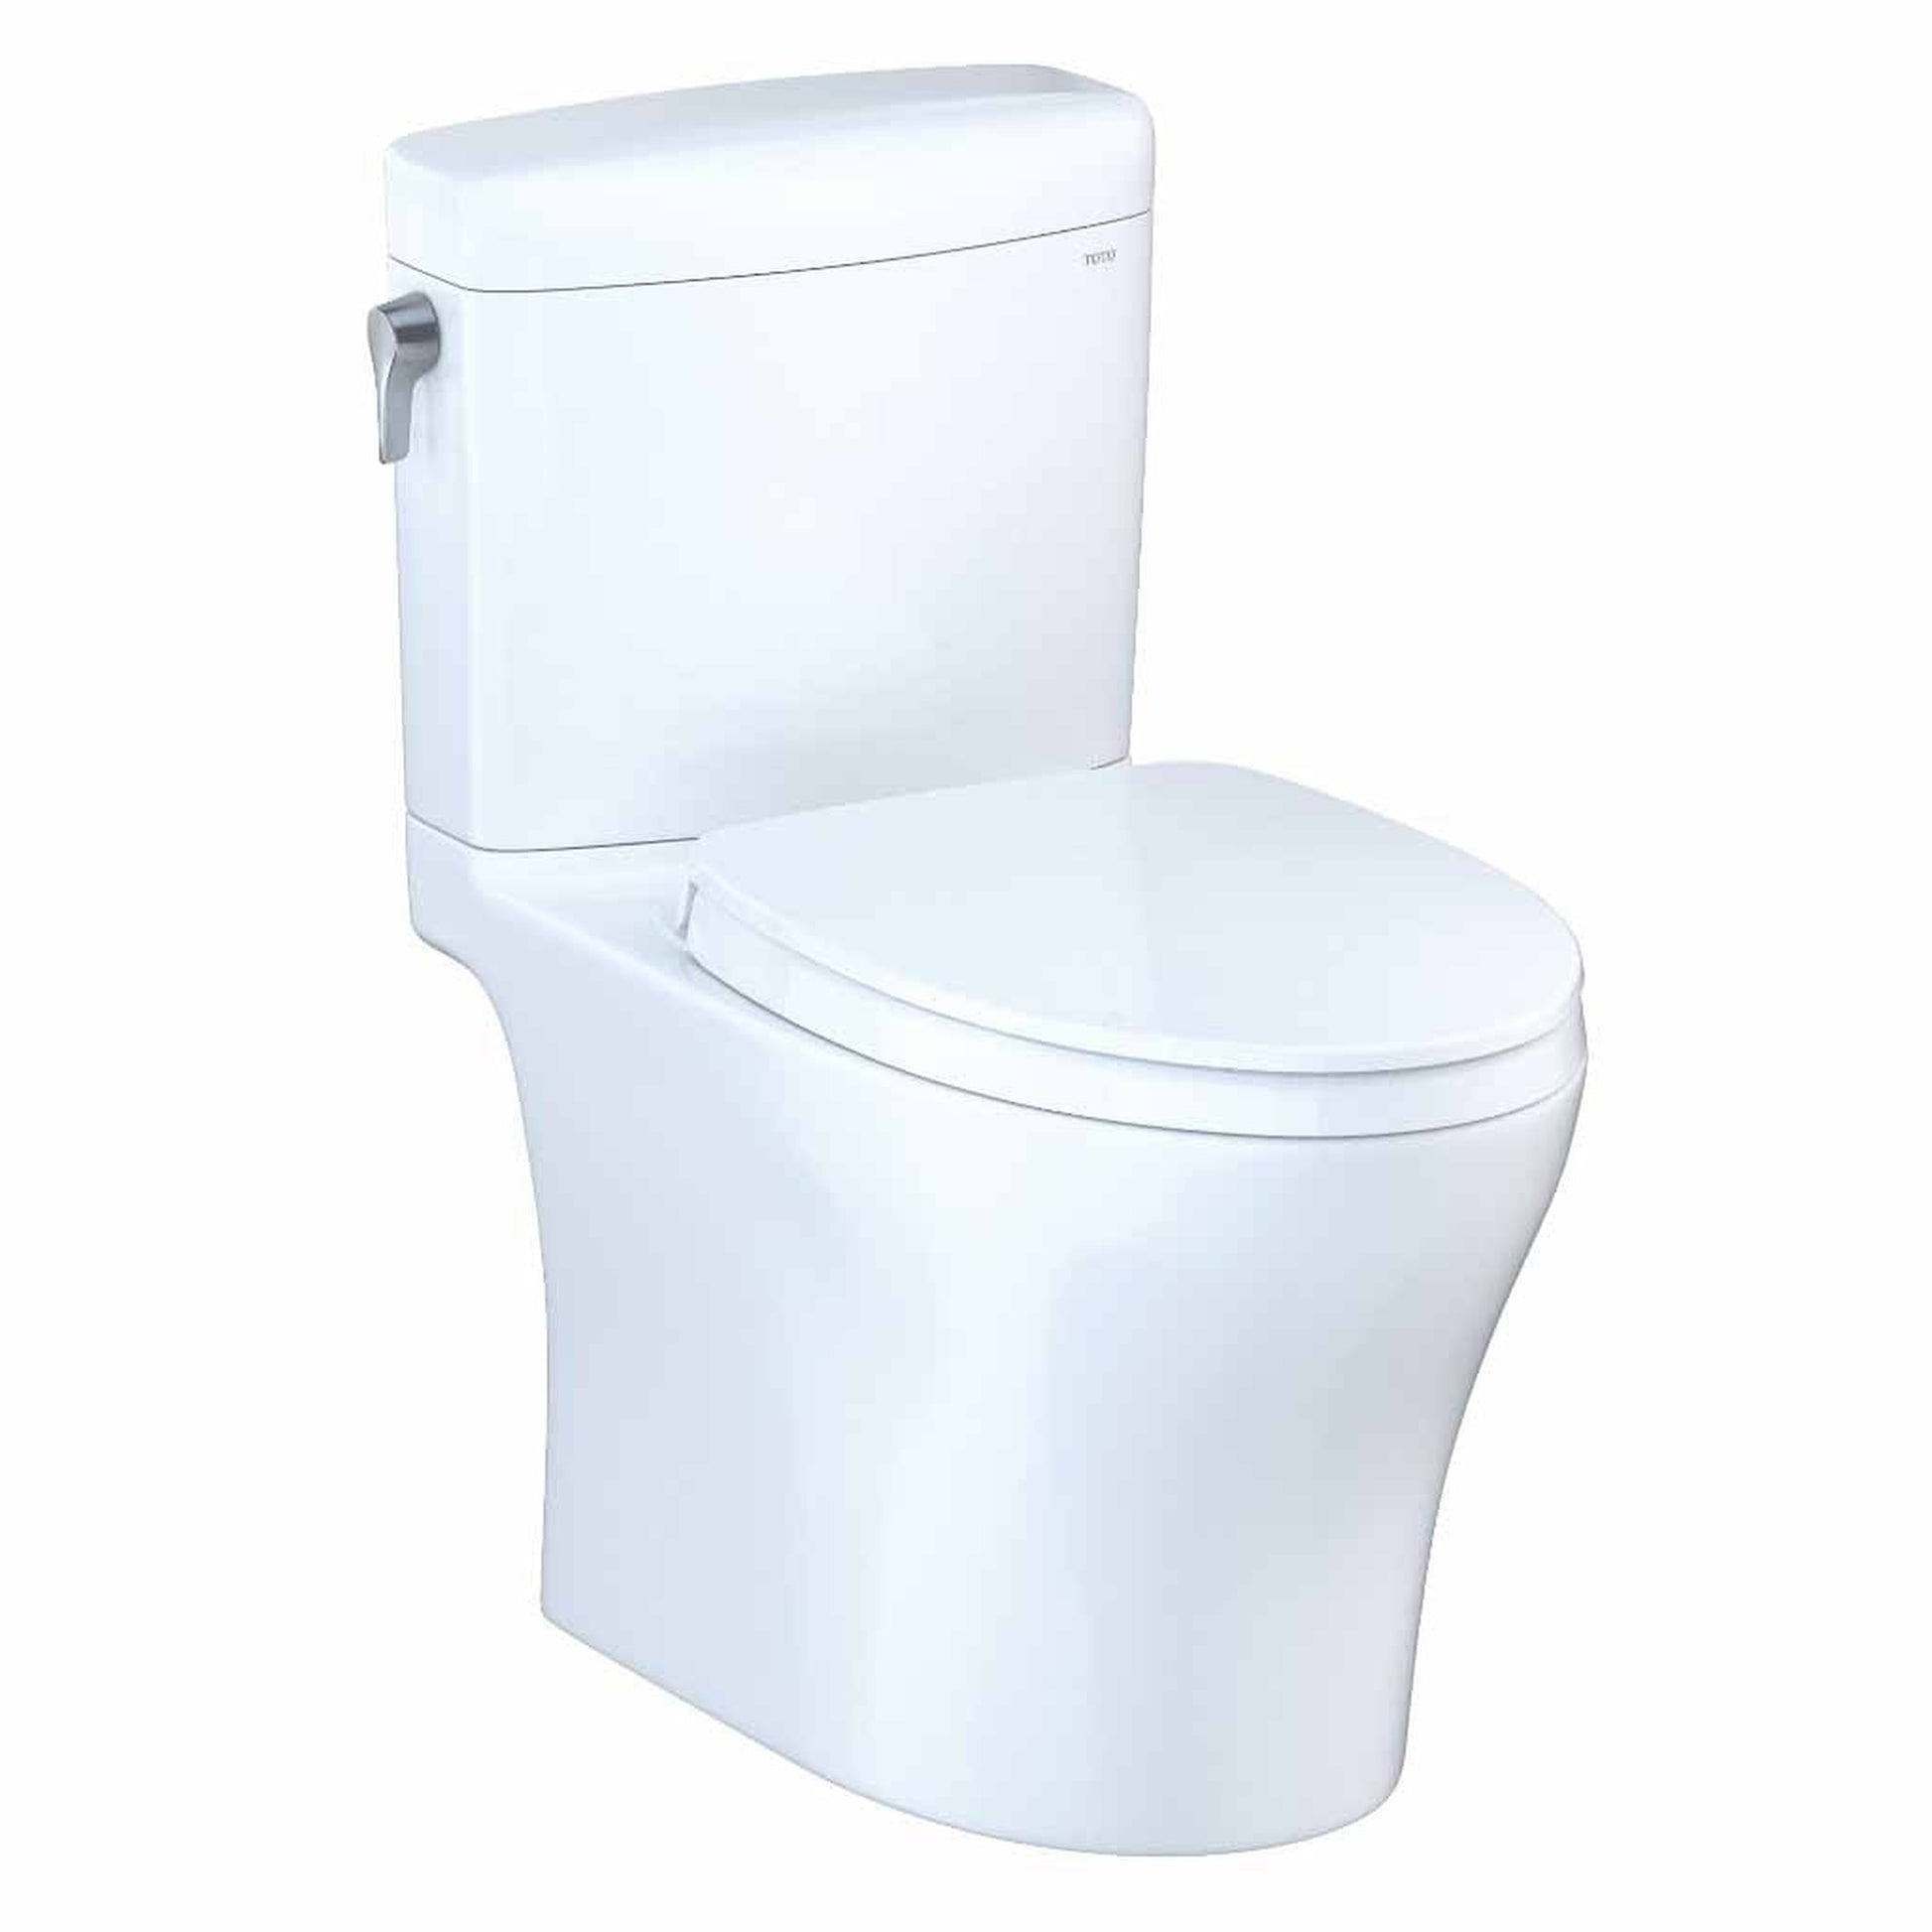 TOTO Aquia IV Cube Cotton White 1.0 GPF & 0.8 GPF Dual-Flush Two-Piece Elongated Toilet With WASHLET+ Connection - SoftClose Seat Included